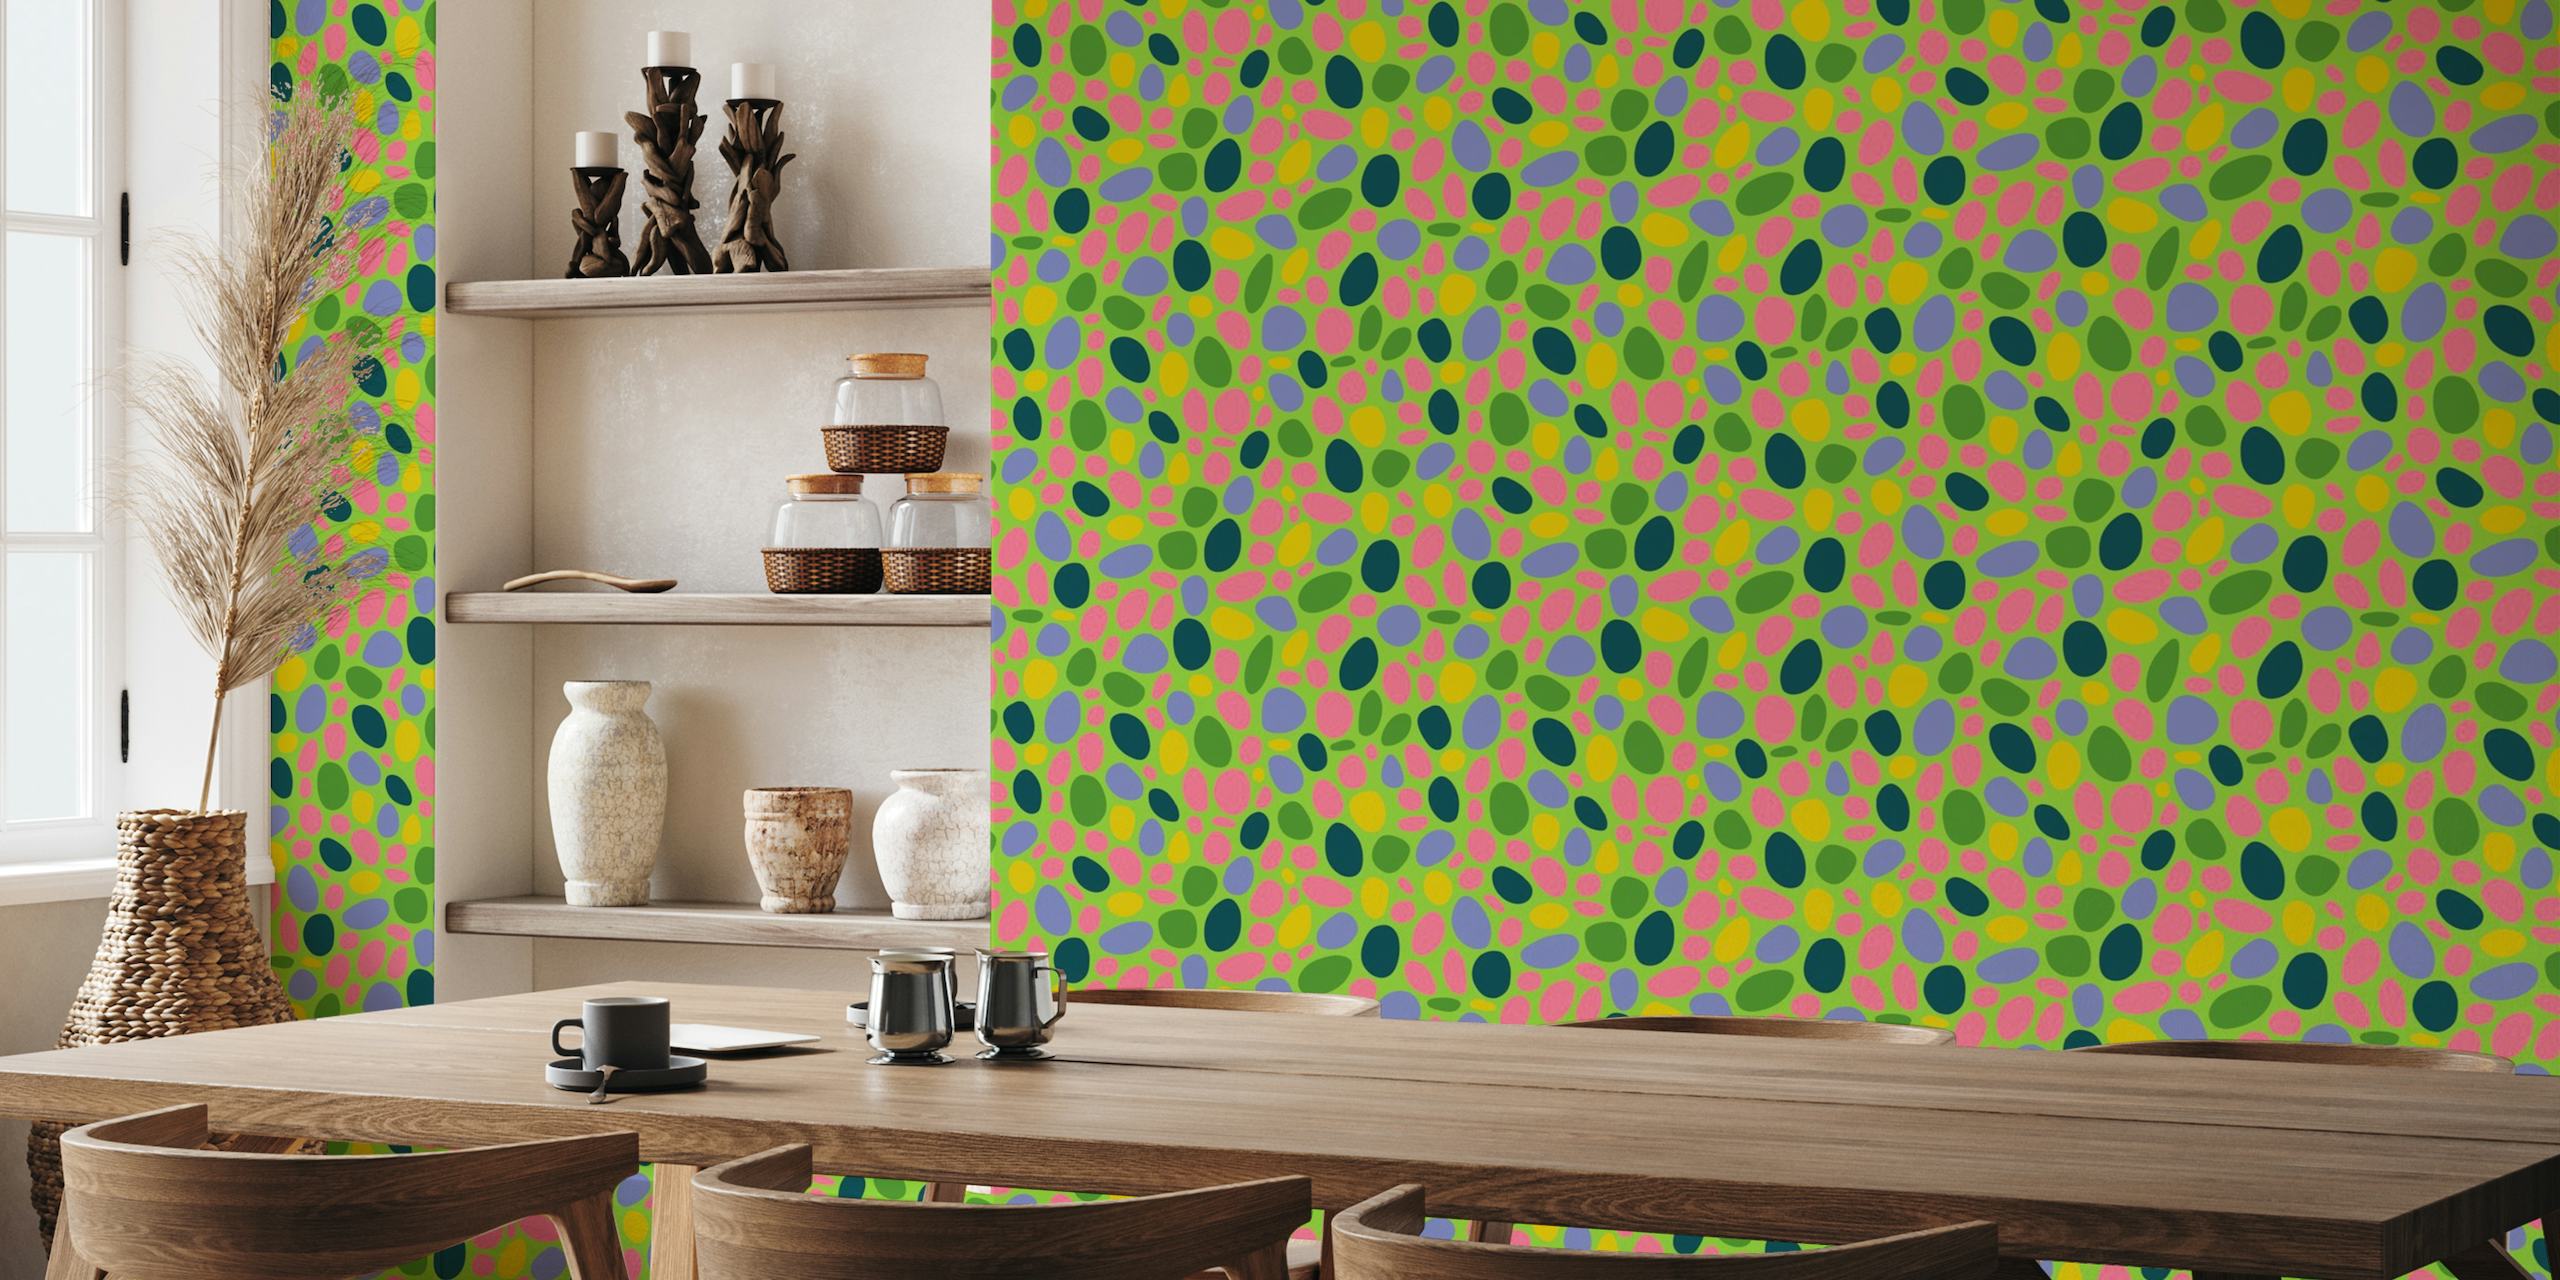 Abstract retro pebbles wall mural in lime green and pink colors